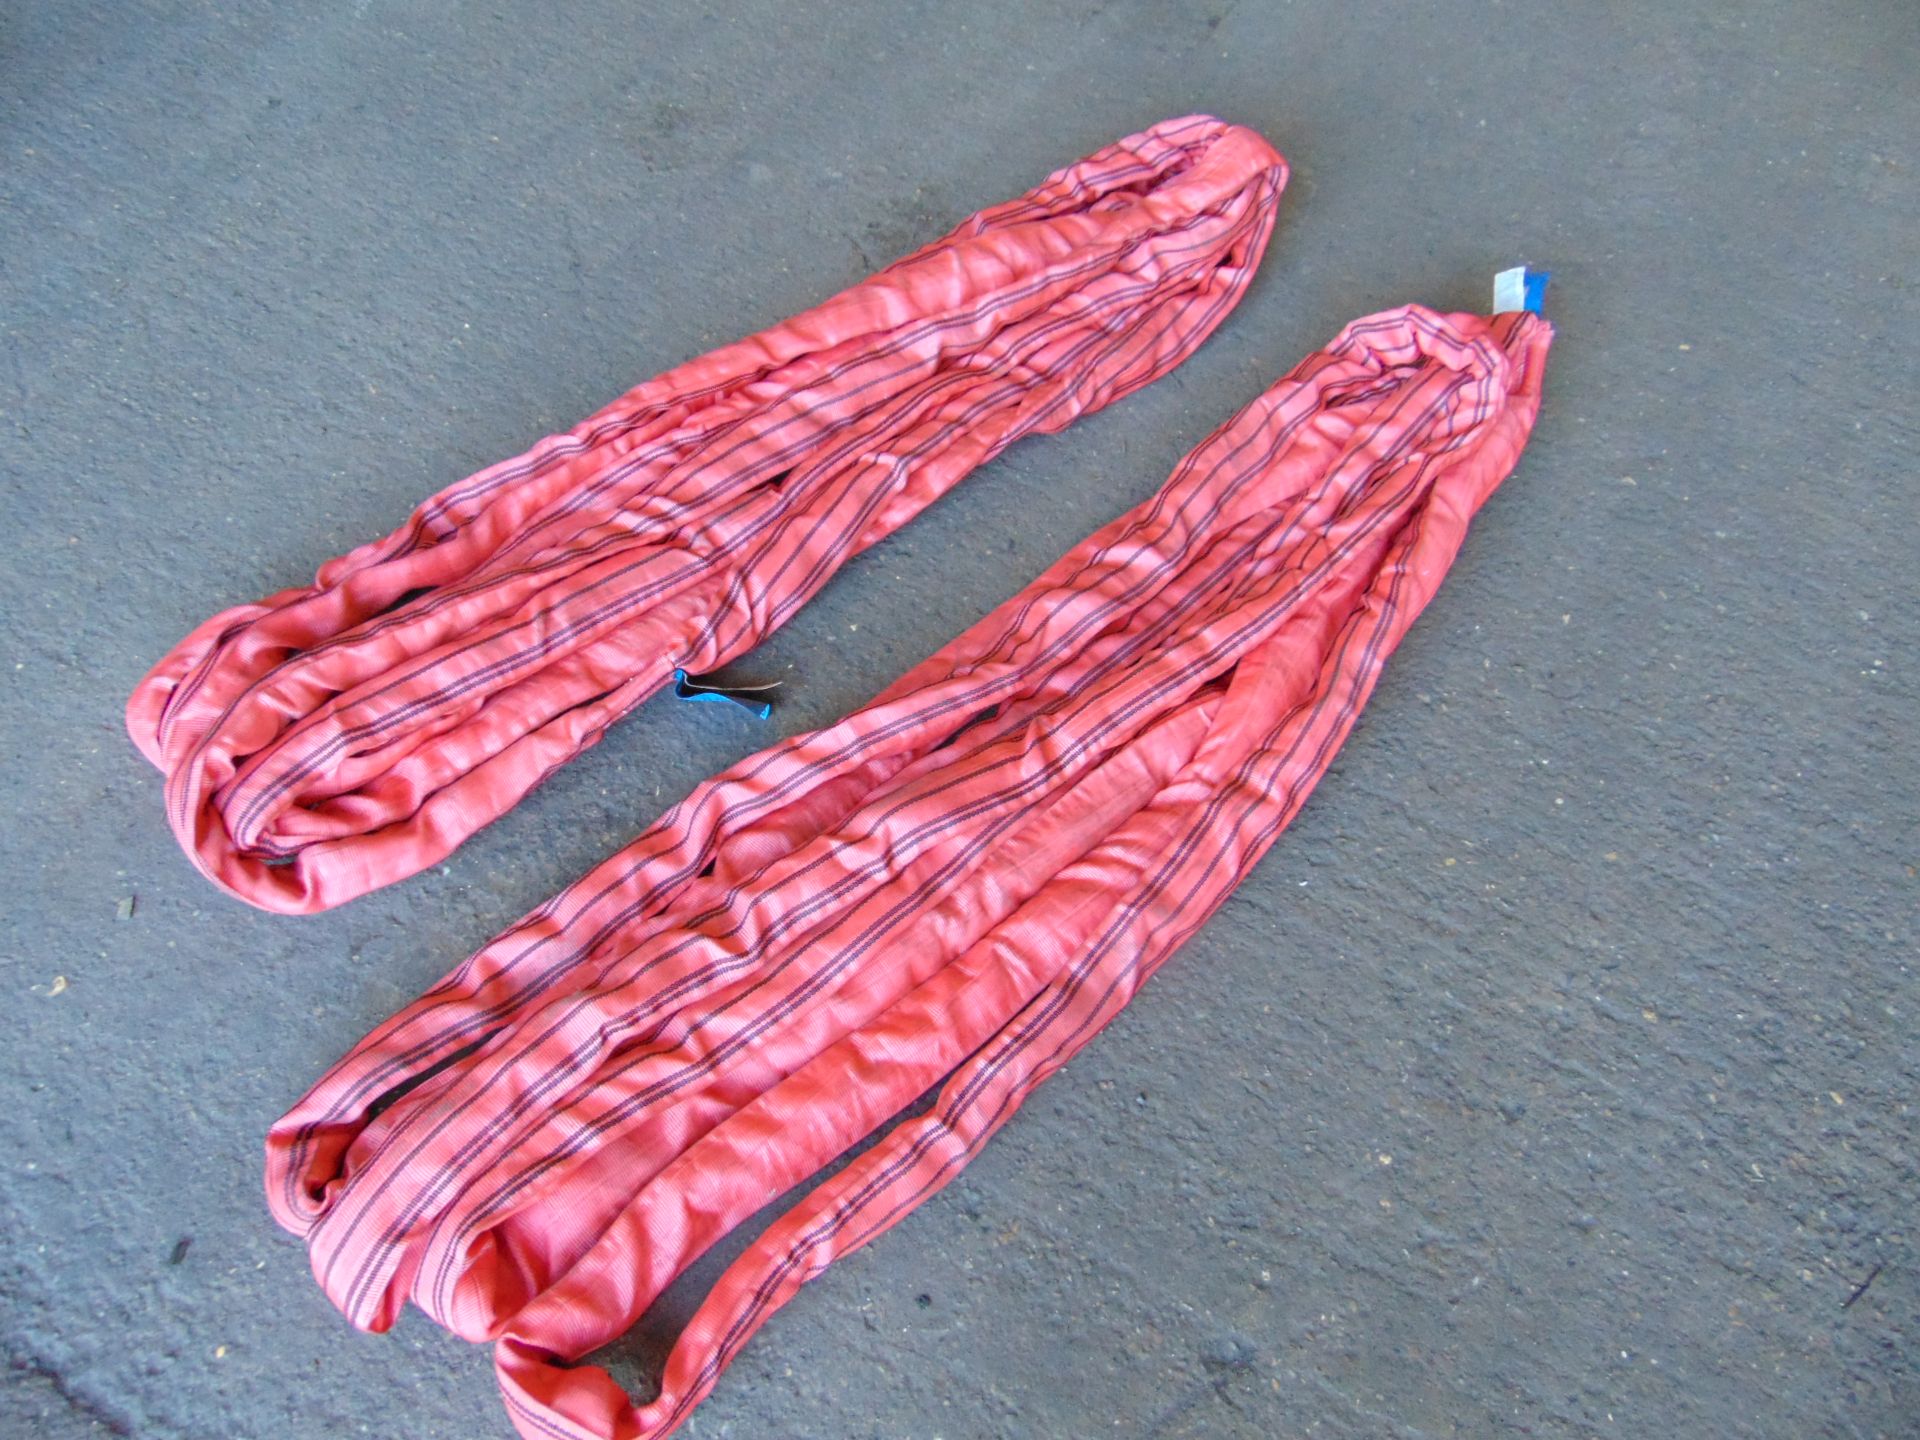 Qty 2 x SpanSet 5m 5 Ton Recovery Round Slings